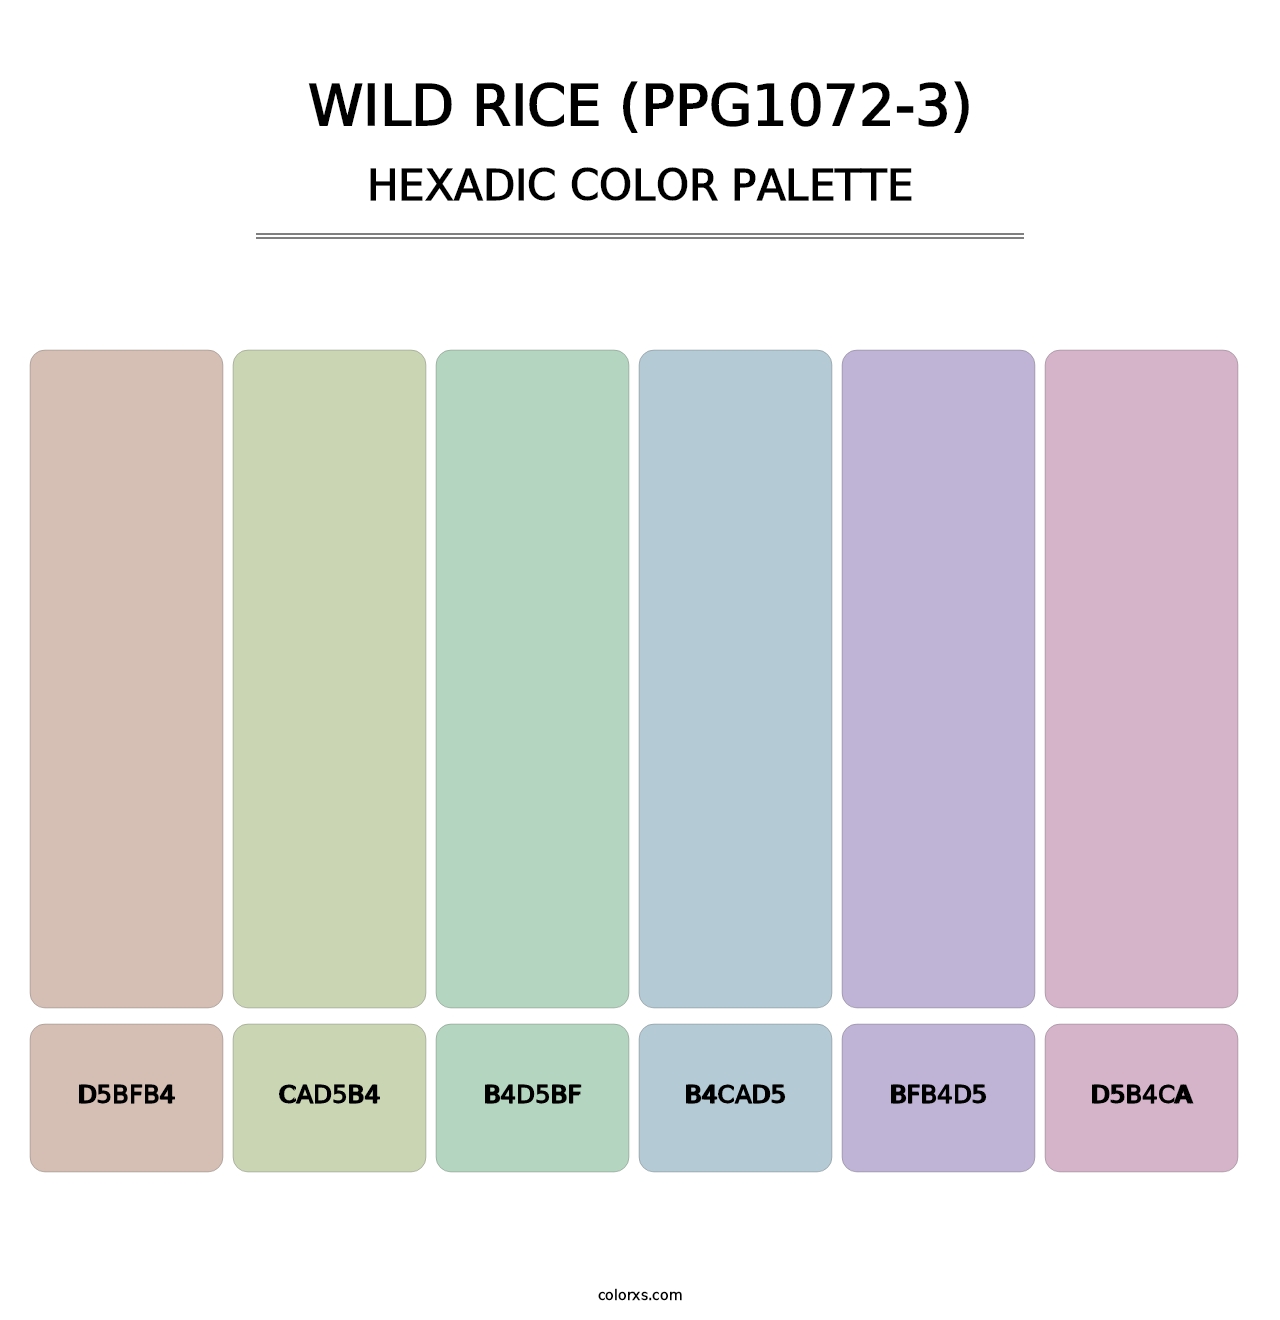 Wild Rice (PPG1072-3) - Hexadic Color Palette